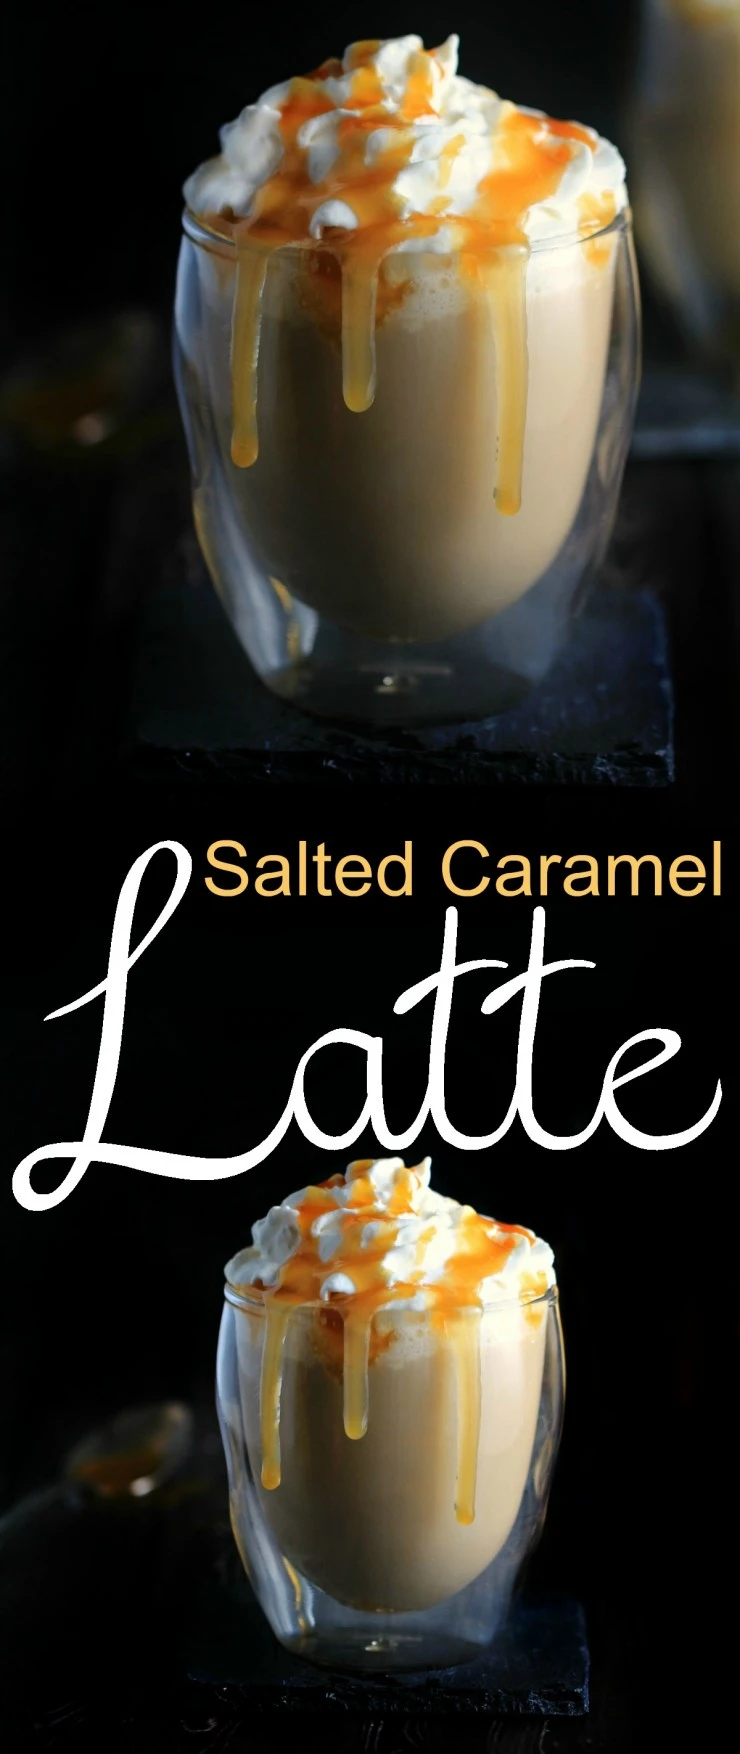 Salted Caramel is one of my favourite fall flavours and this Salted Caramel Latte is perfectly sweet with just the right touch of savoury.